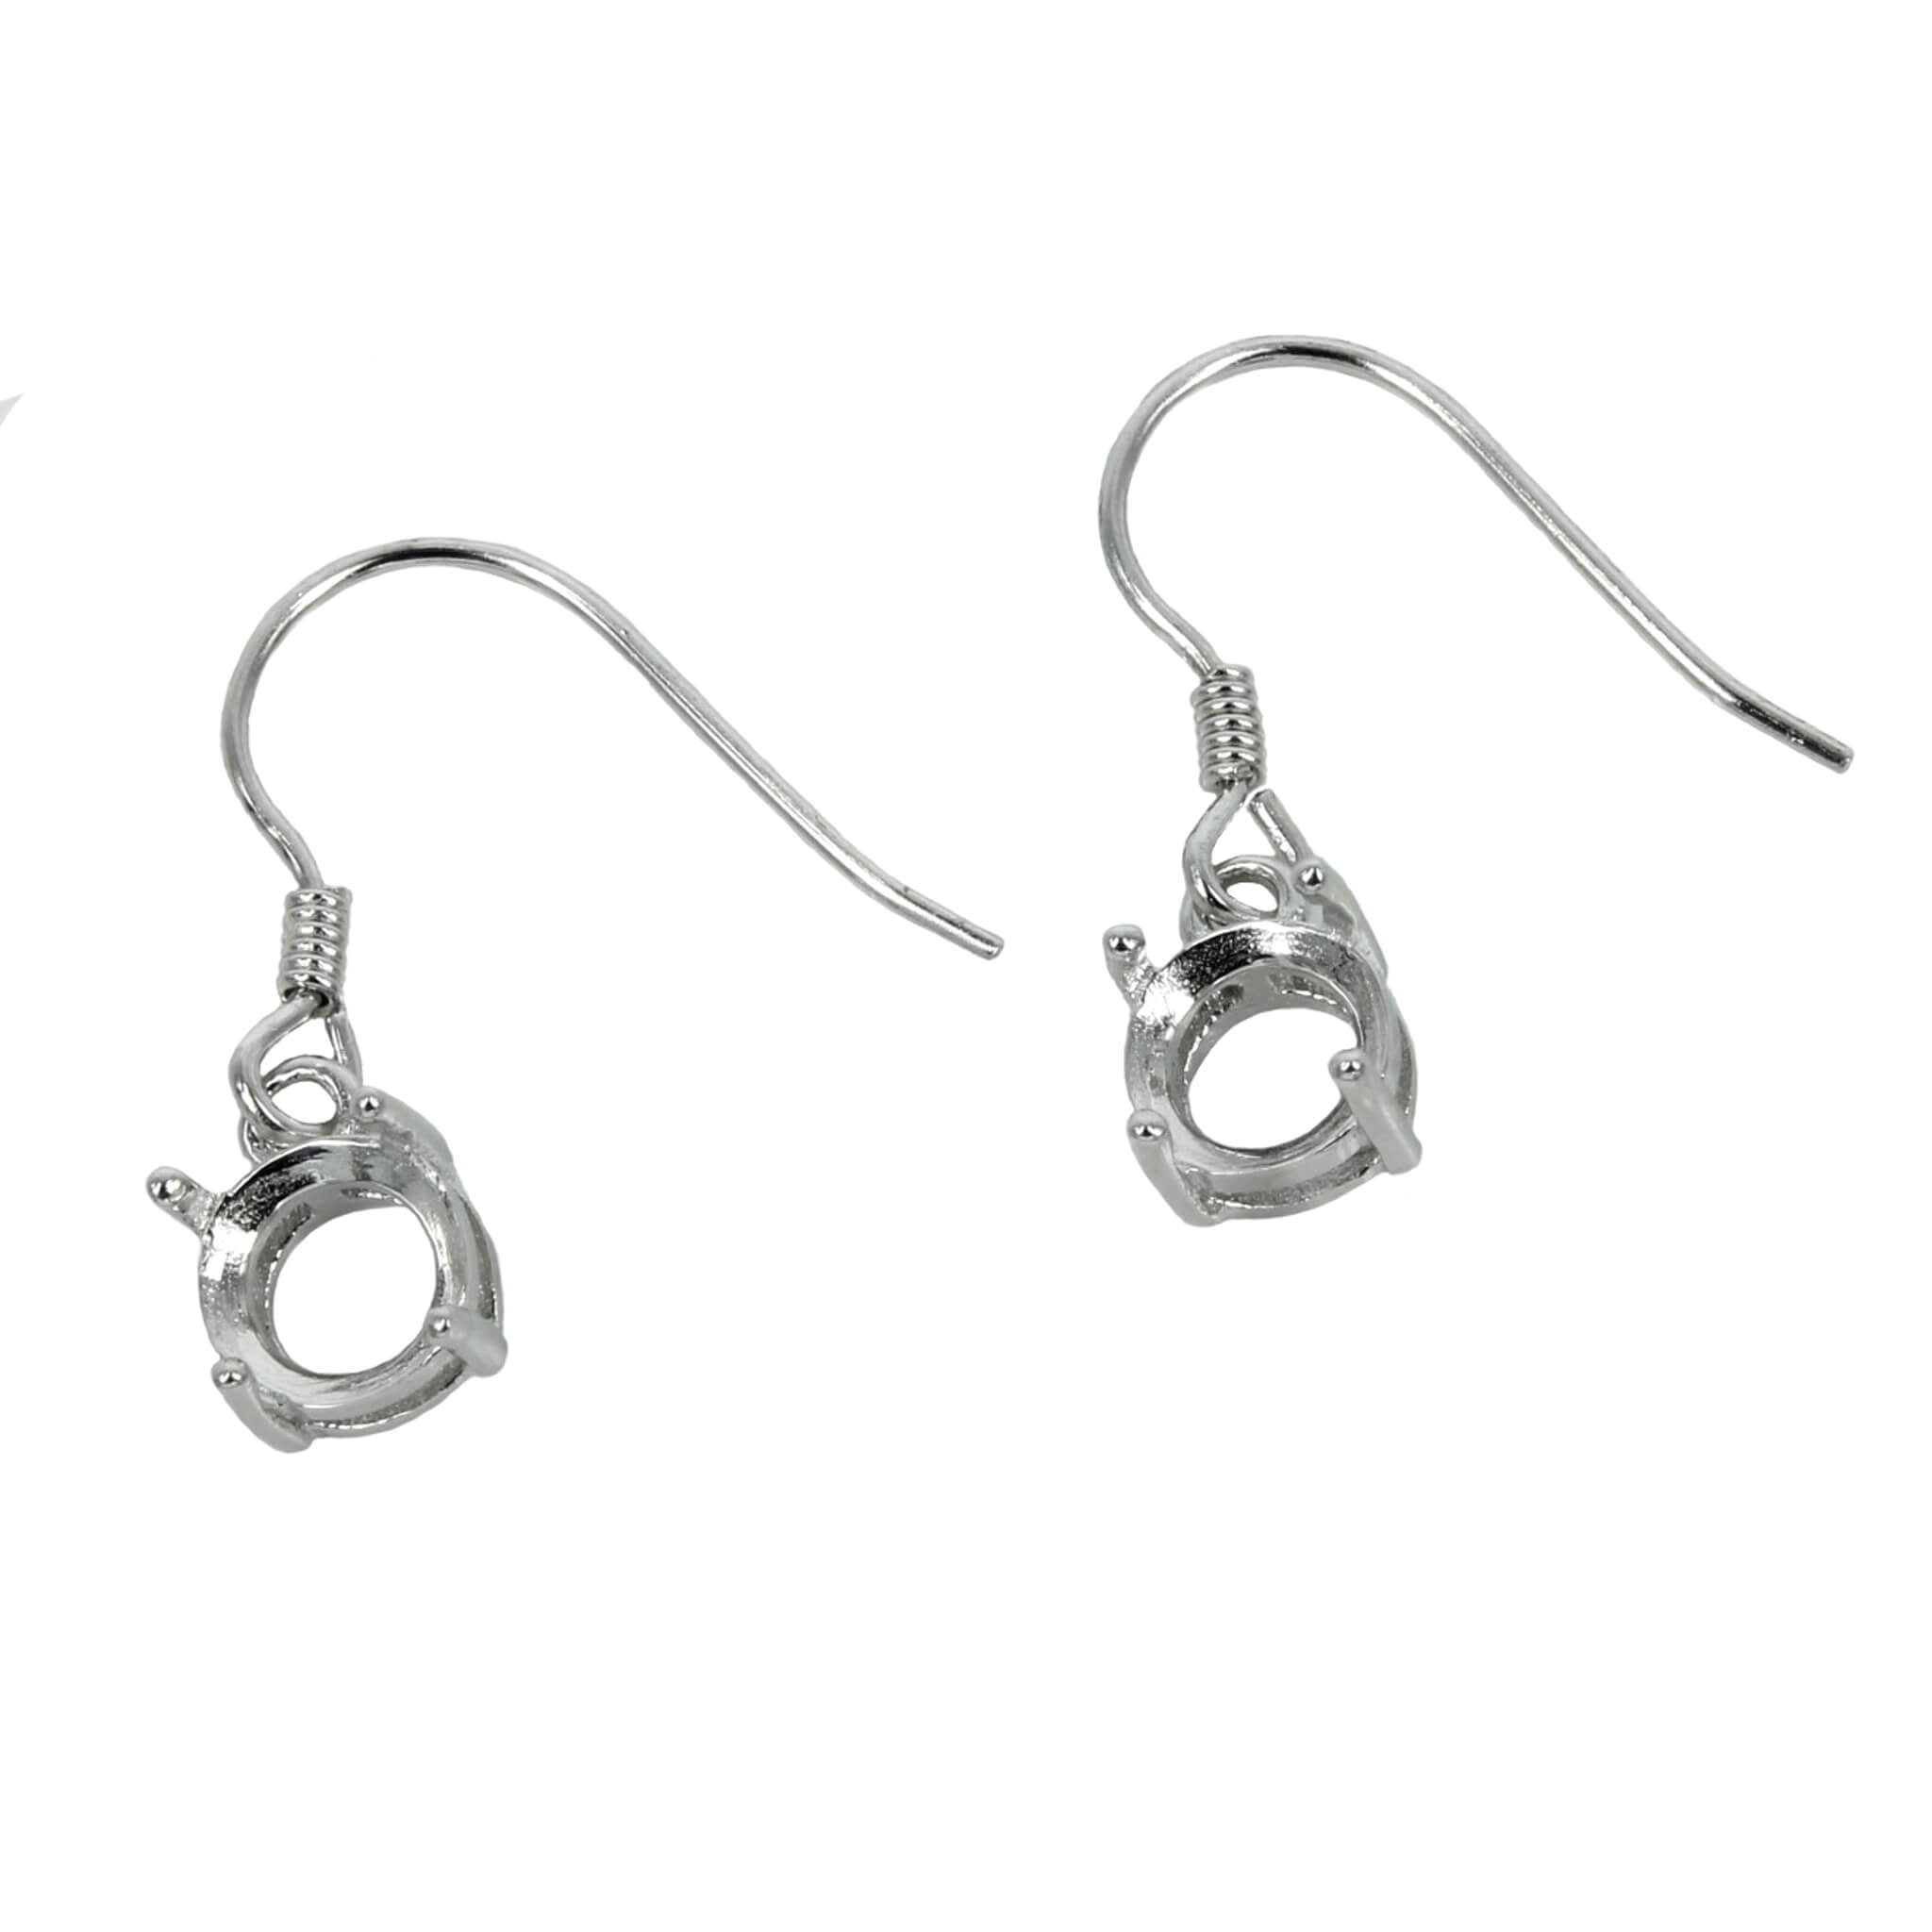 Ear Wires with Round Basket Setting in Sterling Silver